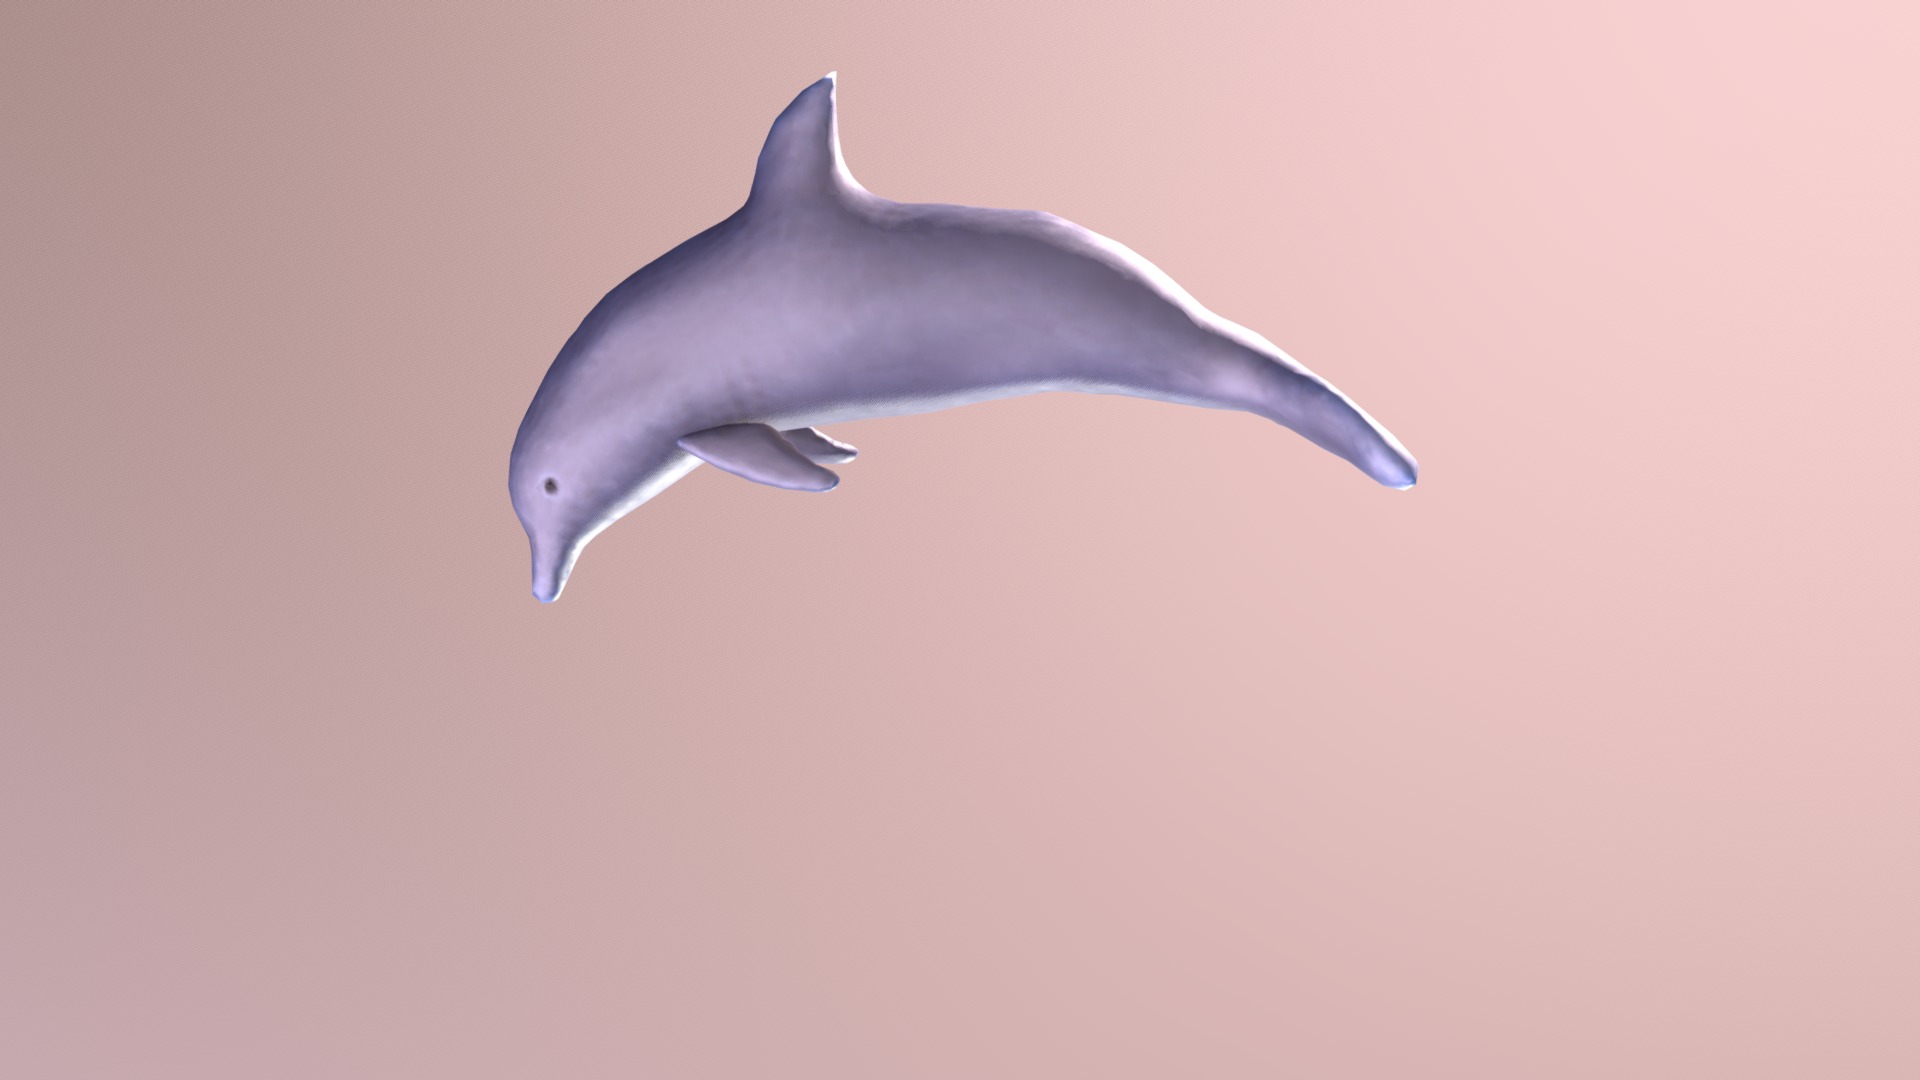 3D model Dolphin jumping - This is a 3D model of the Dolphin jumping. The 3D model is about a dolphin swimming in the water.